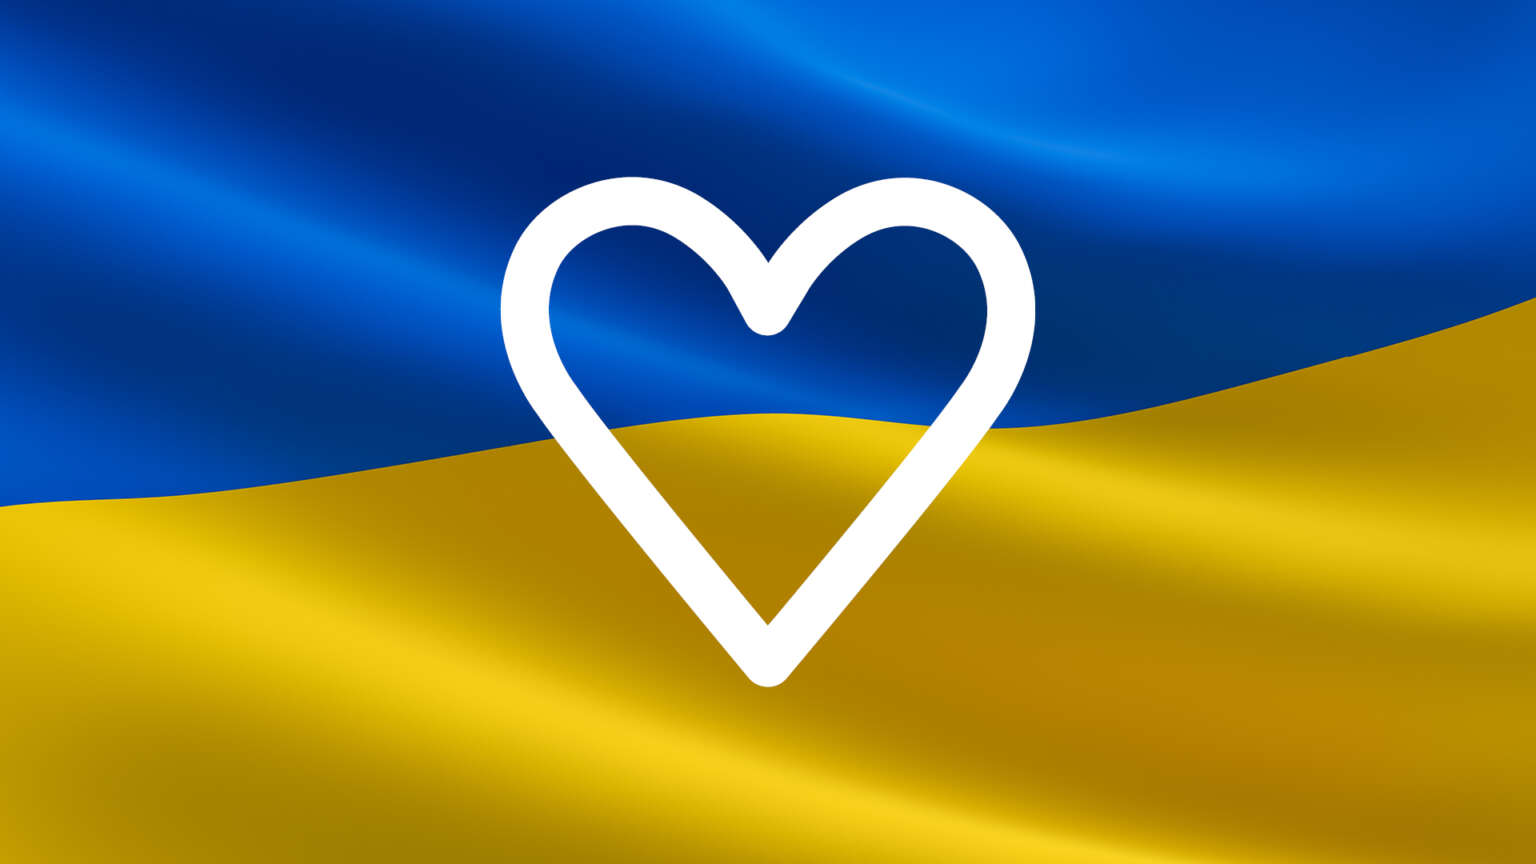 Our thoughts and prayers are with Ukraine